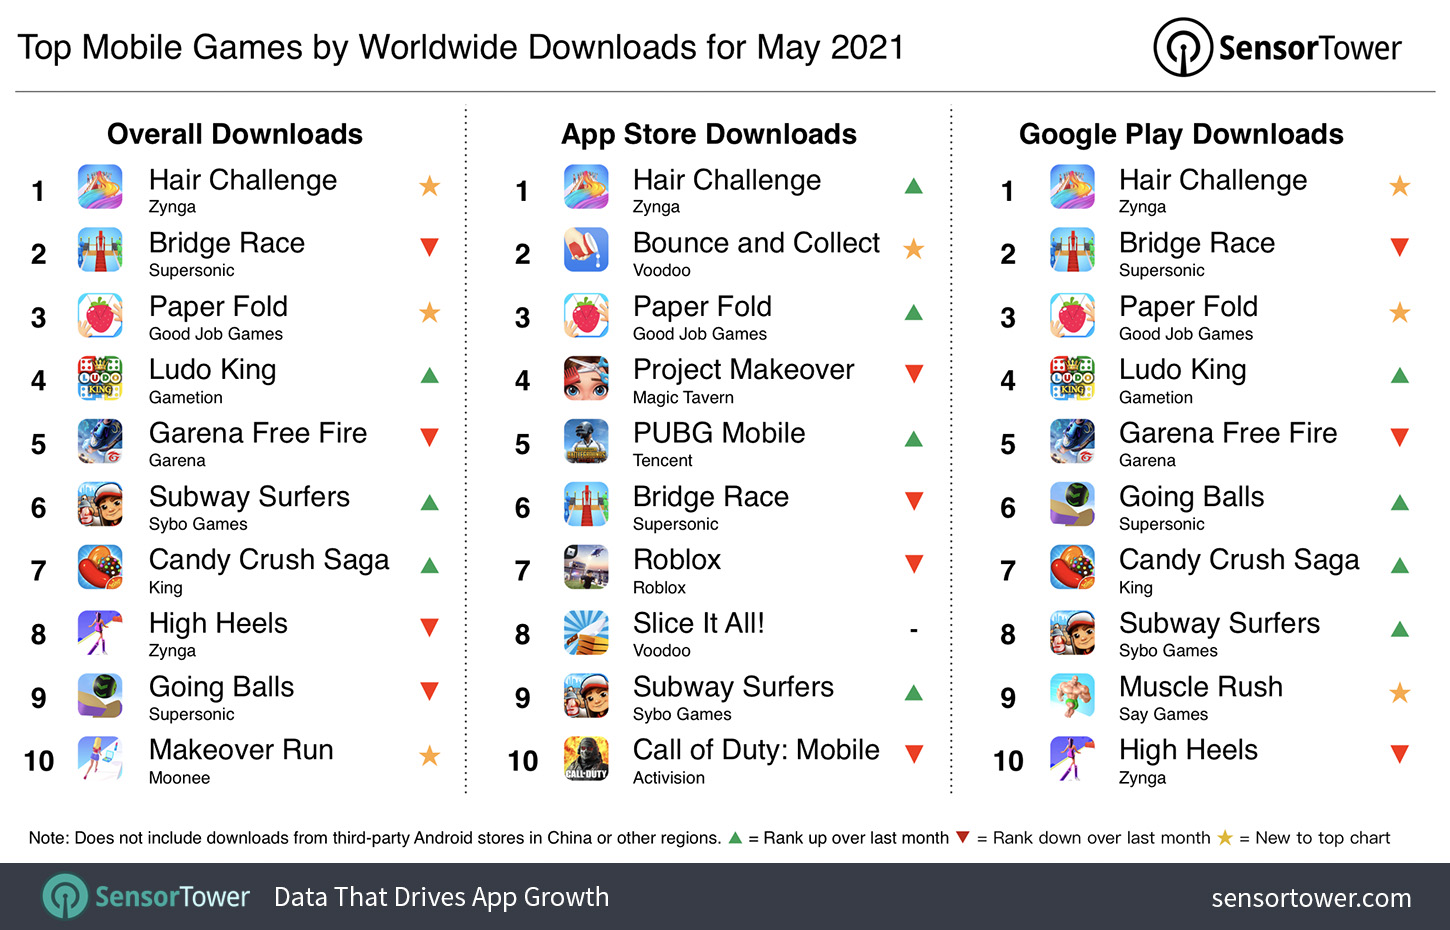 Top Games Worldwide for May 2021 by Downloads